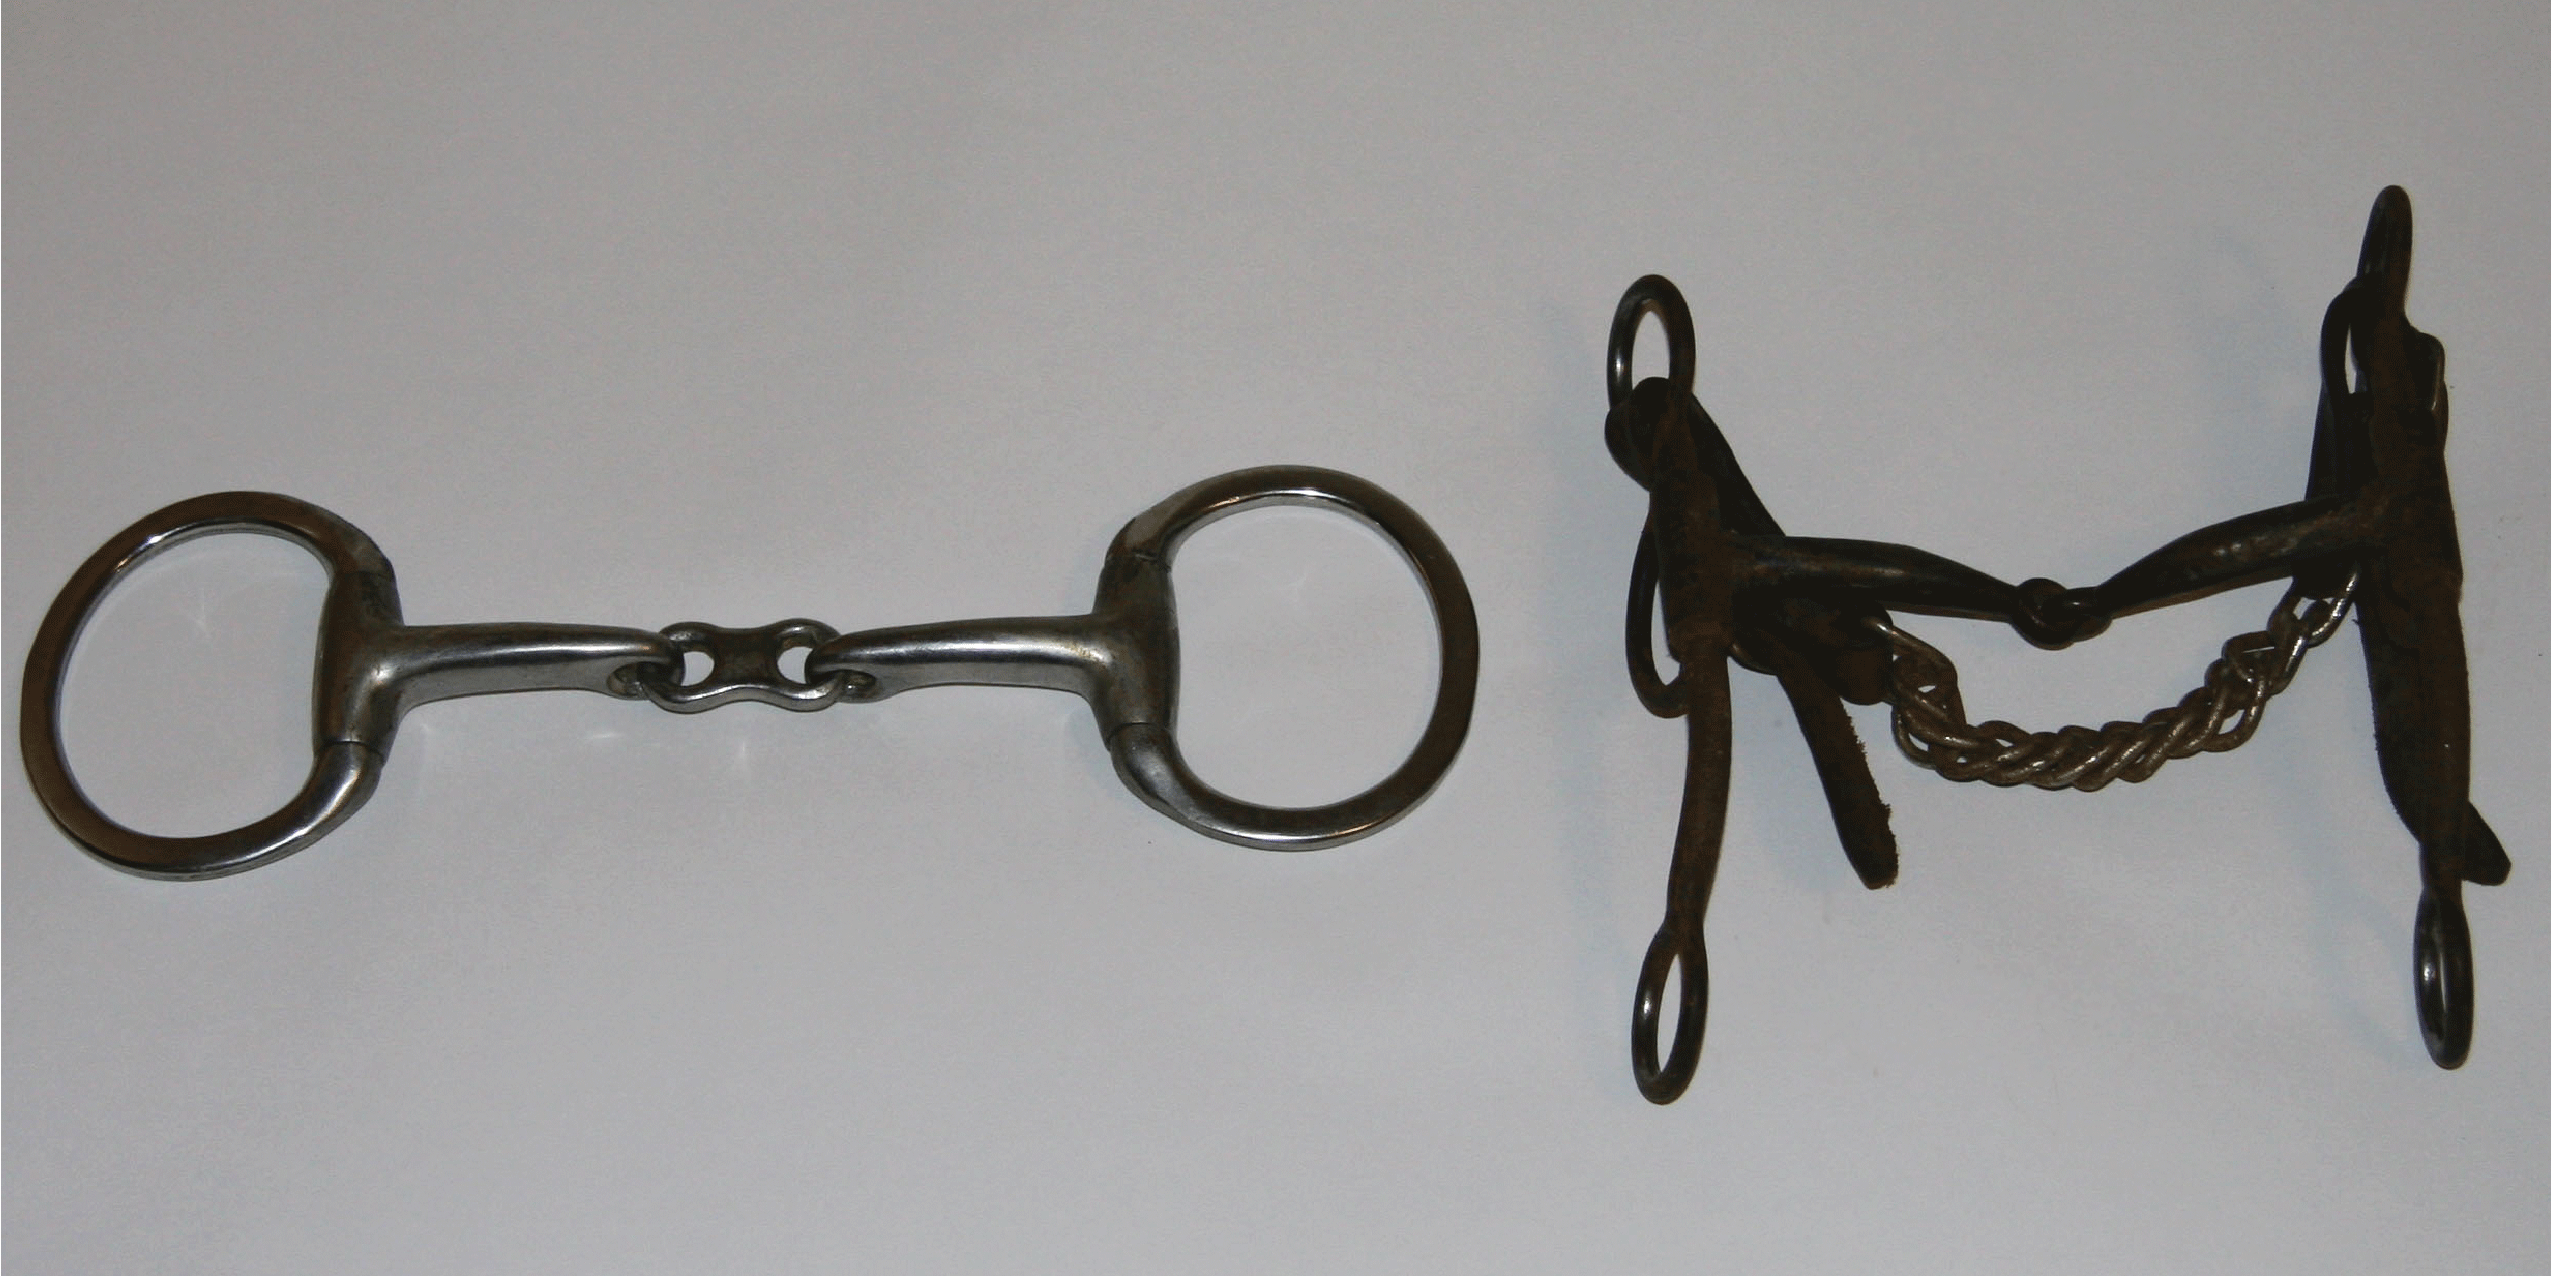 Examples of a commonly seen snaffle bit (left) and curb bit (right).